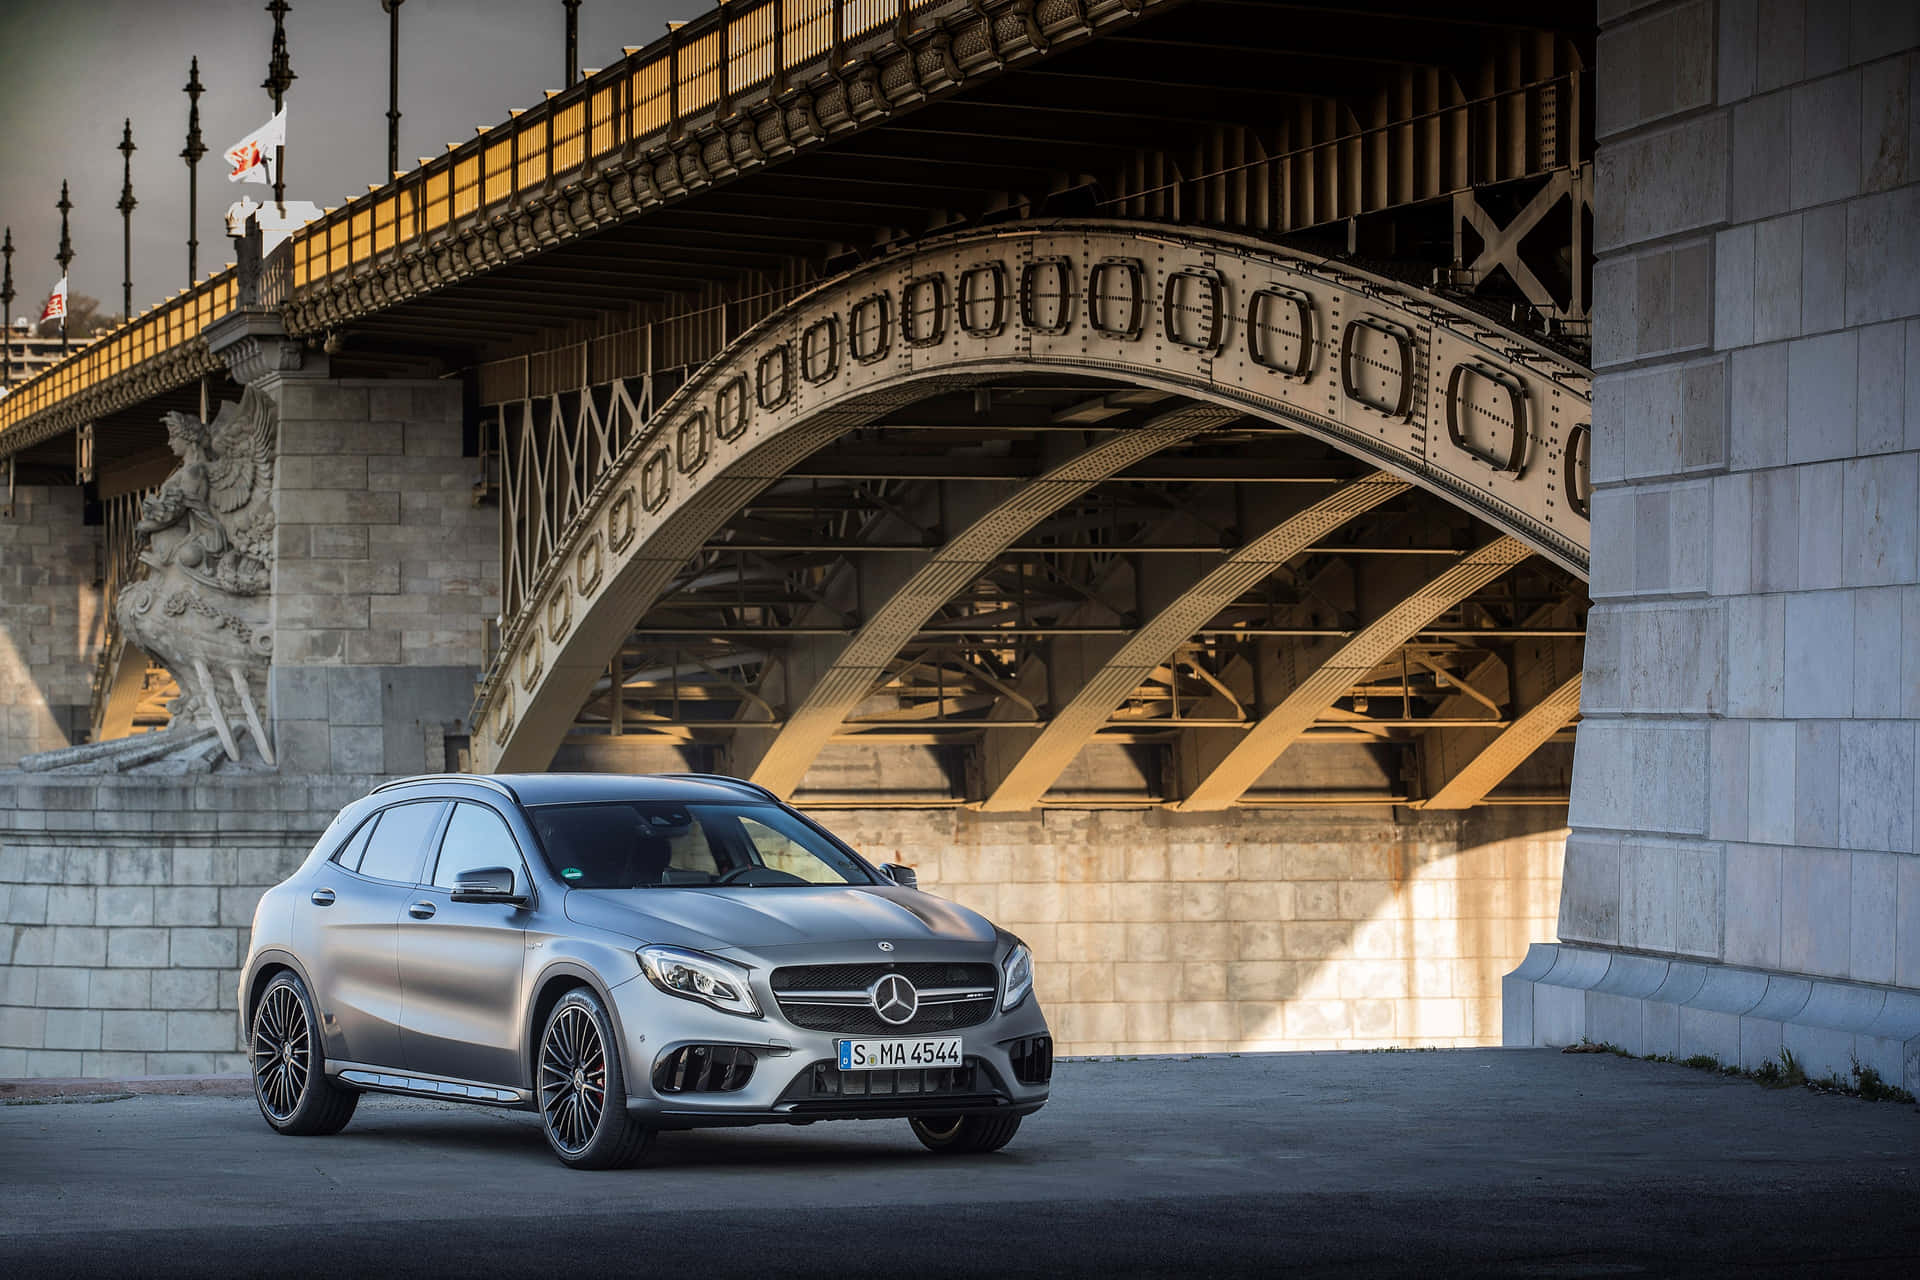 Stylish Mercedes-Benz GLA-Class in a Picturesque Location Wallpaper